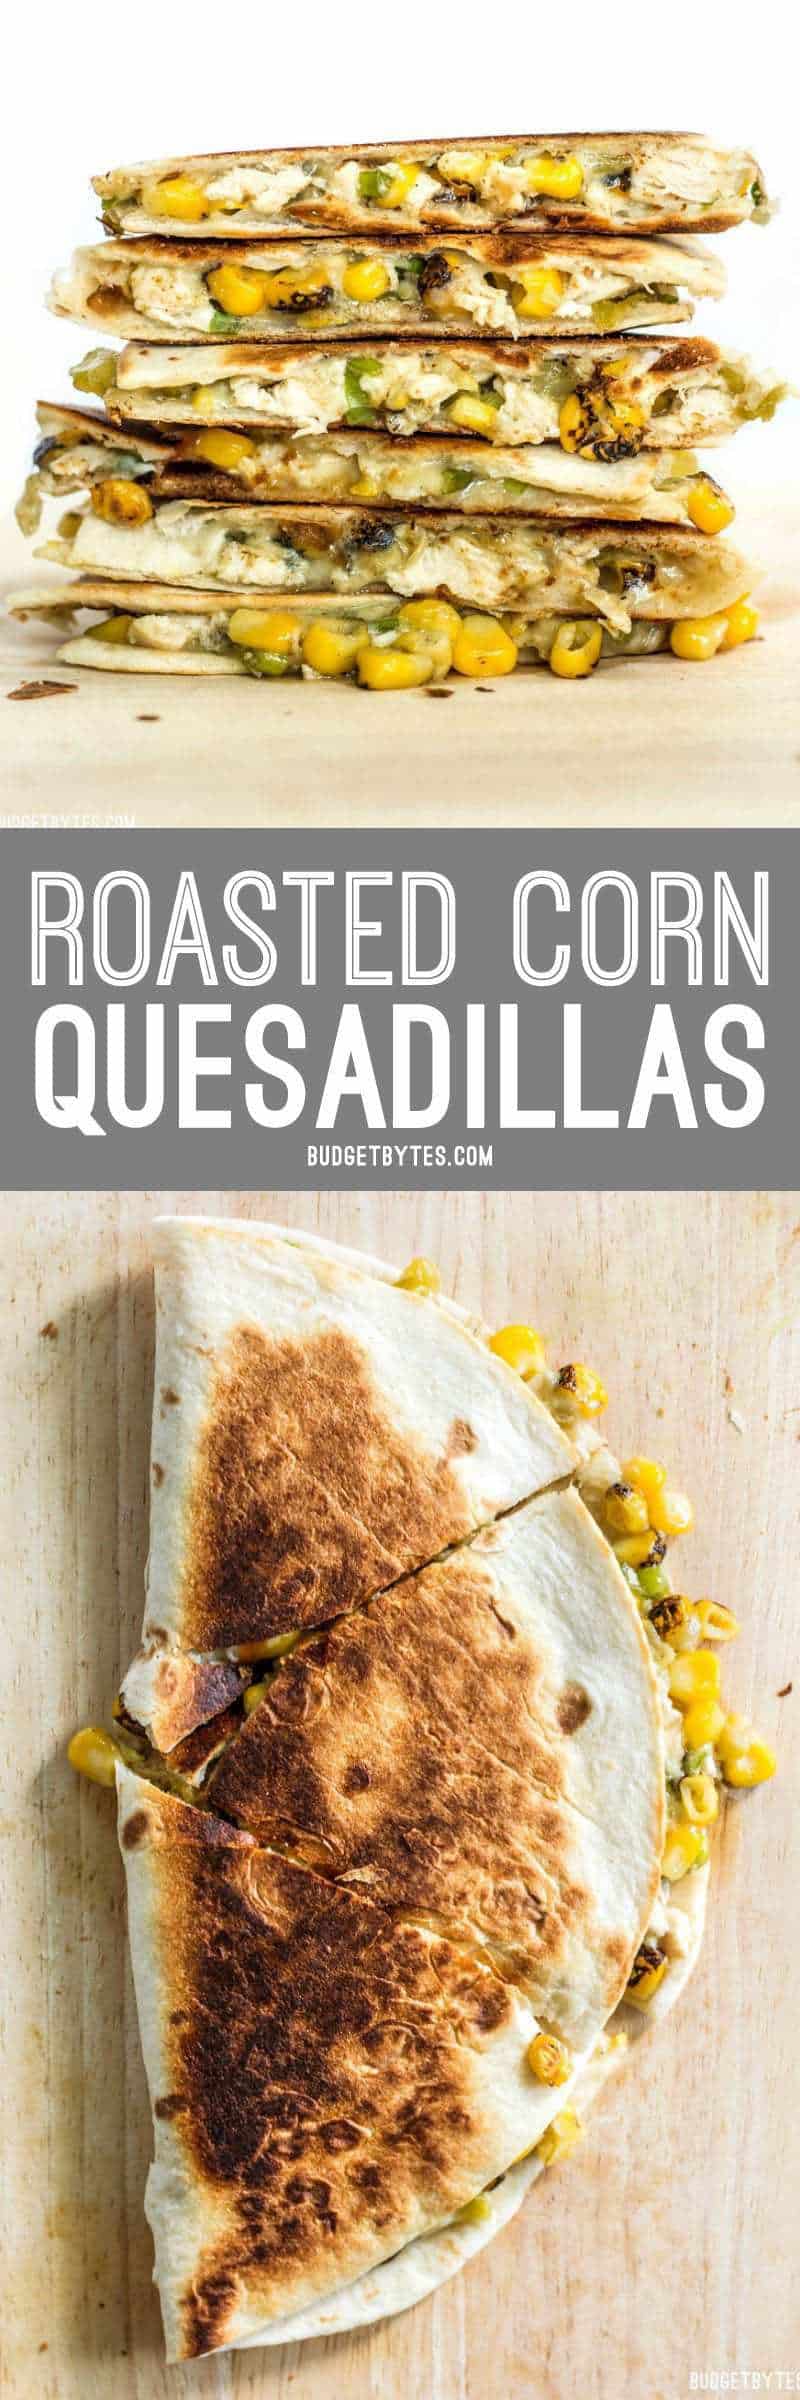 These smoky Roasted Corn Quesadillas are a fast and filling lunch that can be kept in the freezer for a fast meal or snack. BudgetBytes.com